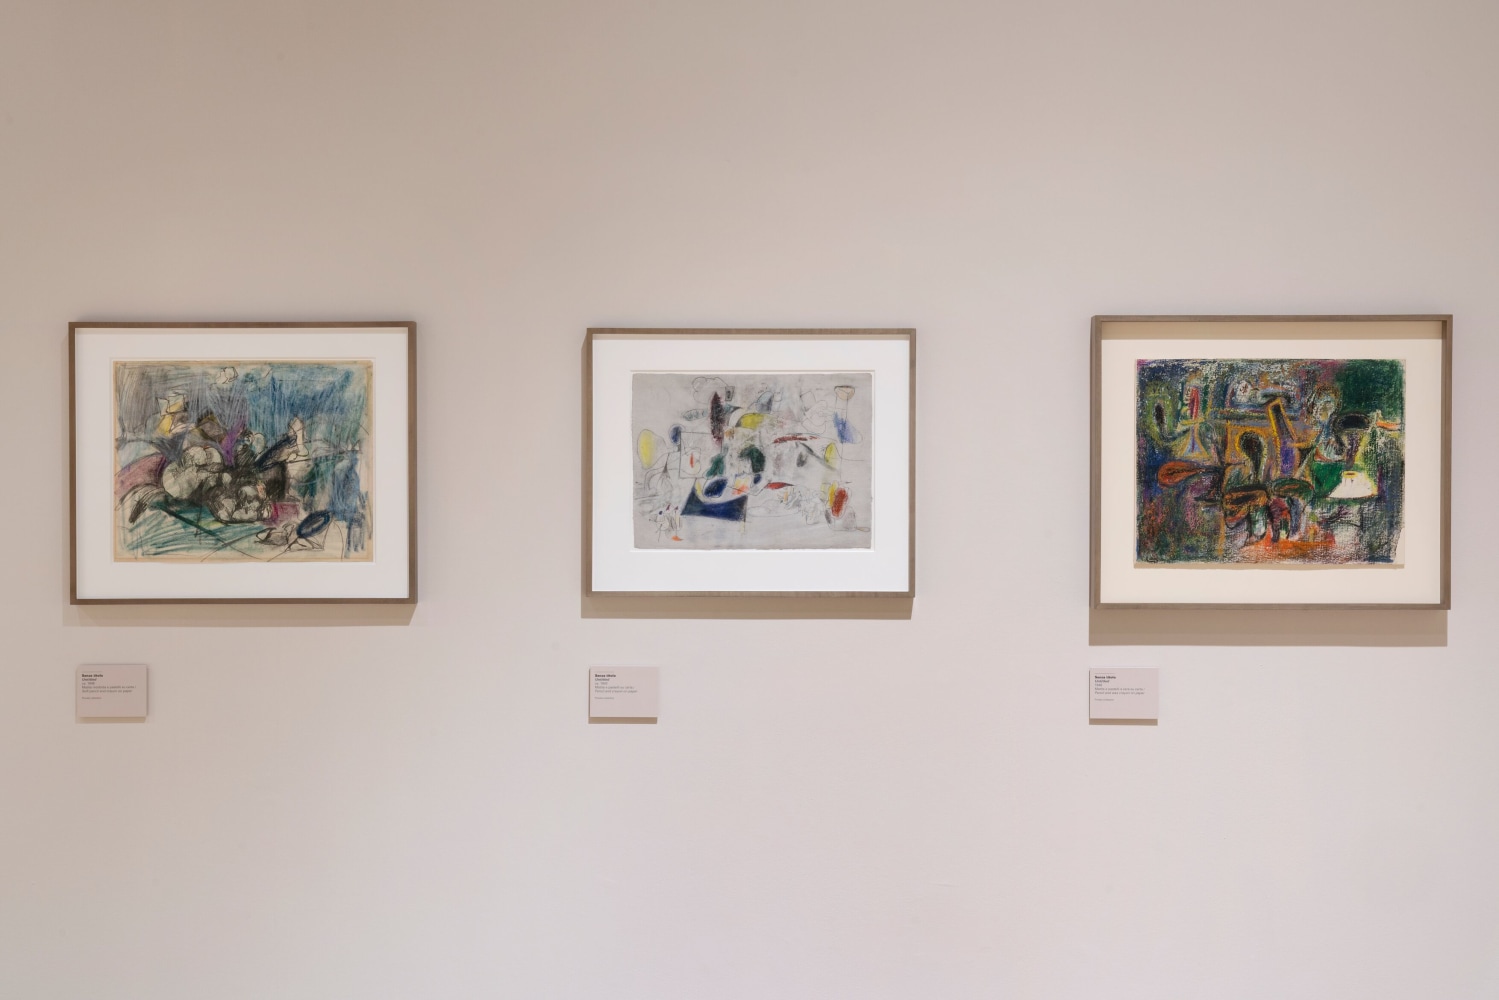 Installation photograph showing a three abstract drawings by Gorky from the 1940s